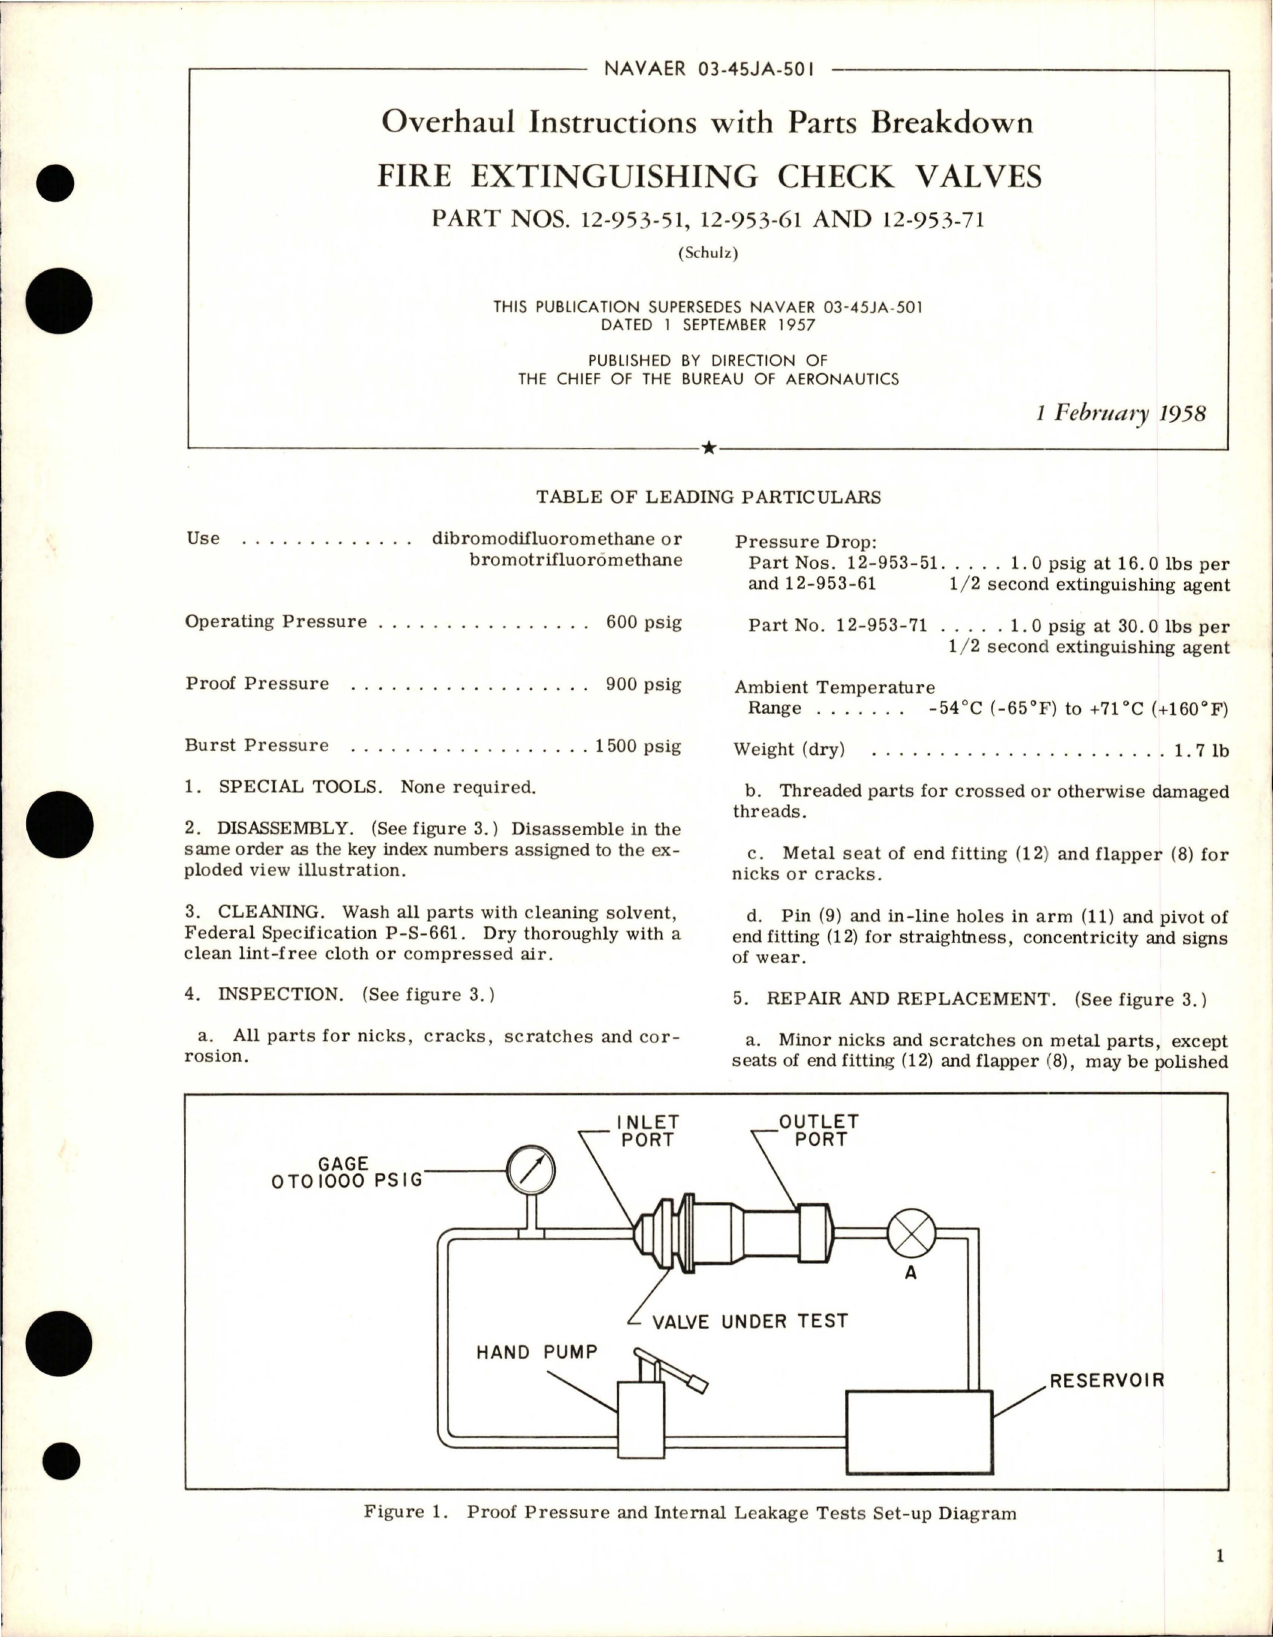 Sample page 1 from AirCorps Library document: Overhaul Instructions with Parts Breakdown for Fire Extinguisher Check Valves - Parts 12-953-51, 12-953-61, and 12-953-71